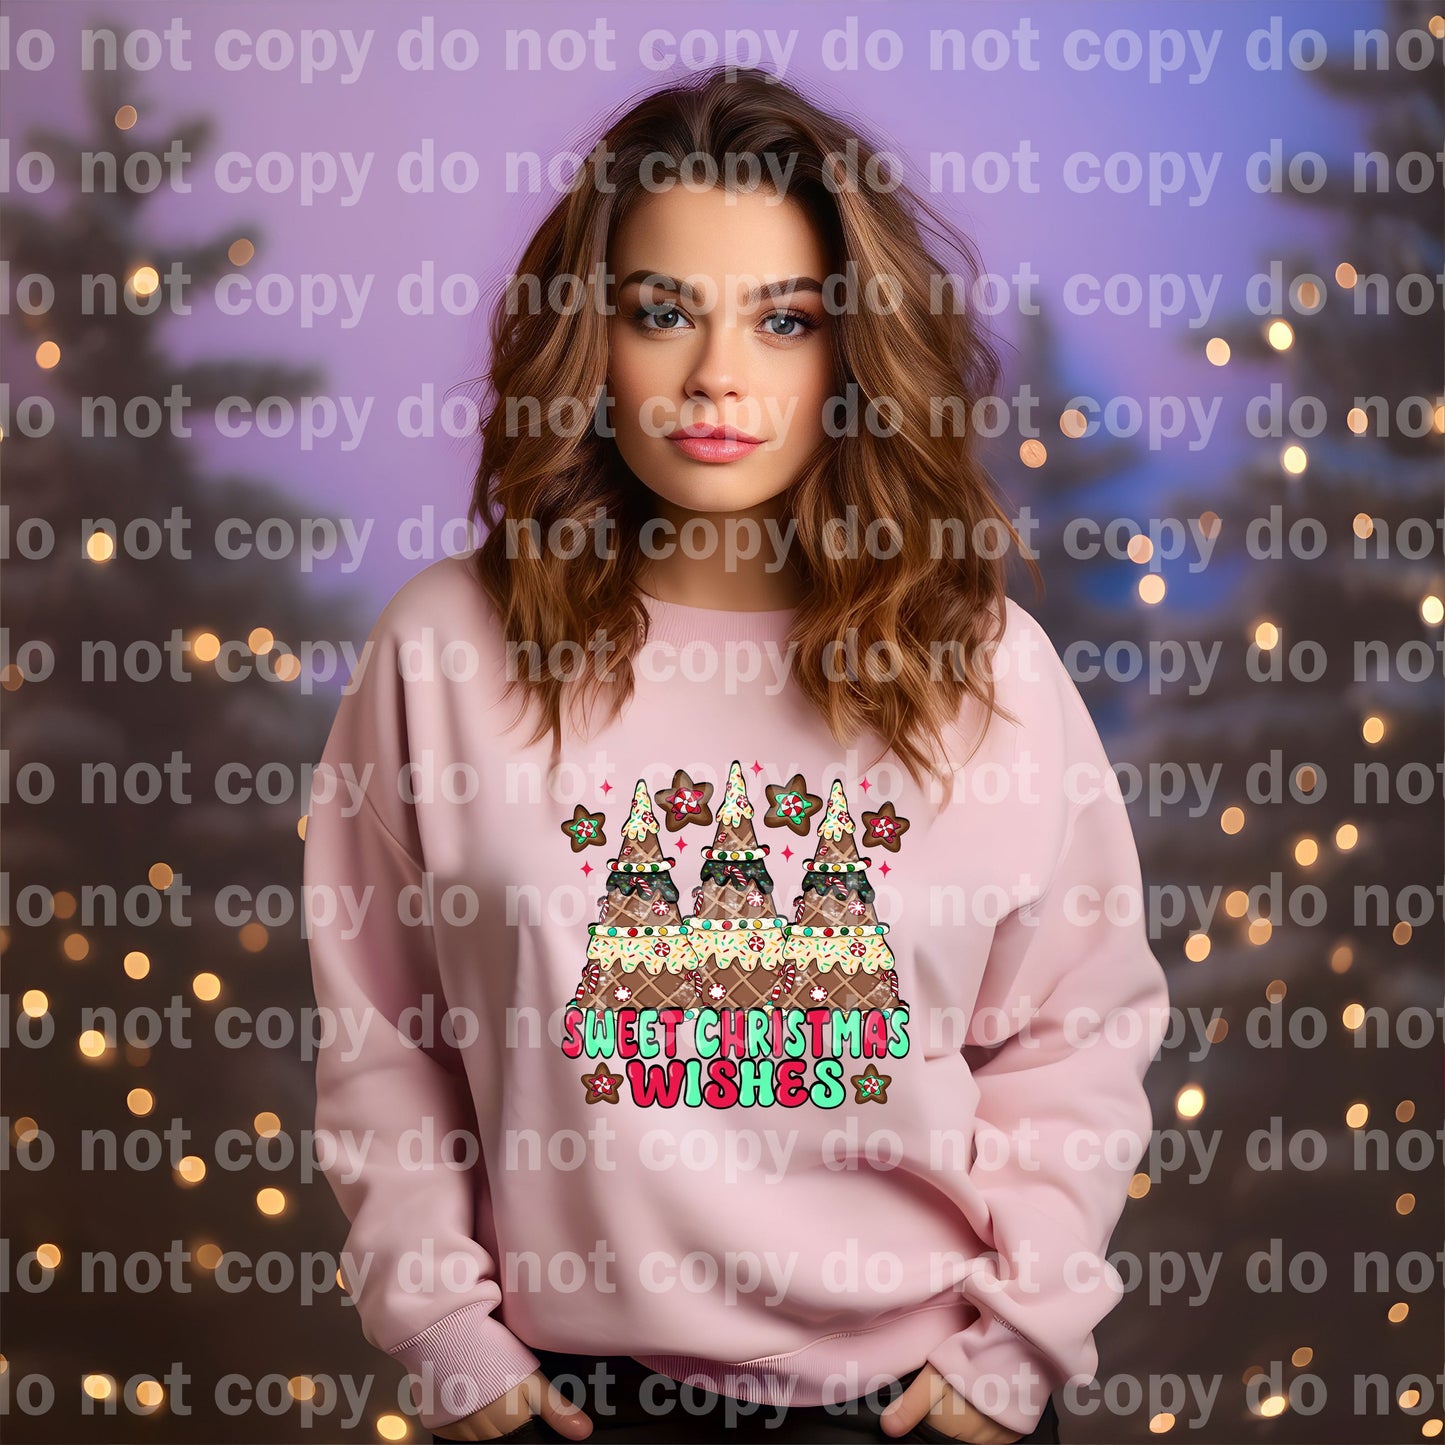 Sweet Christmas Wishes with Optional Sleeve Design Dream Print or Sublimation Print